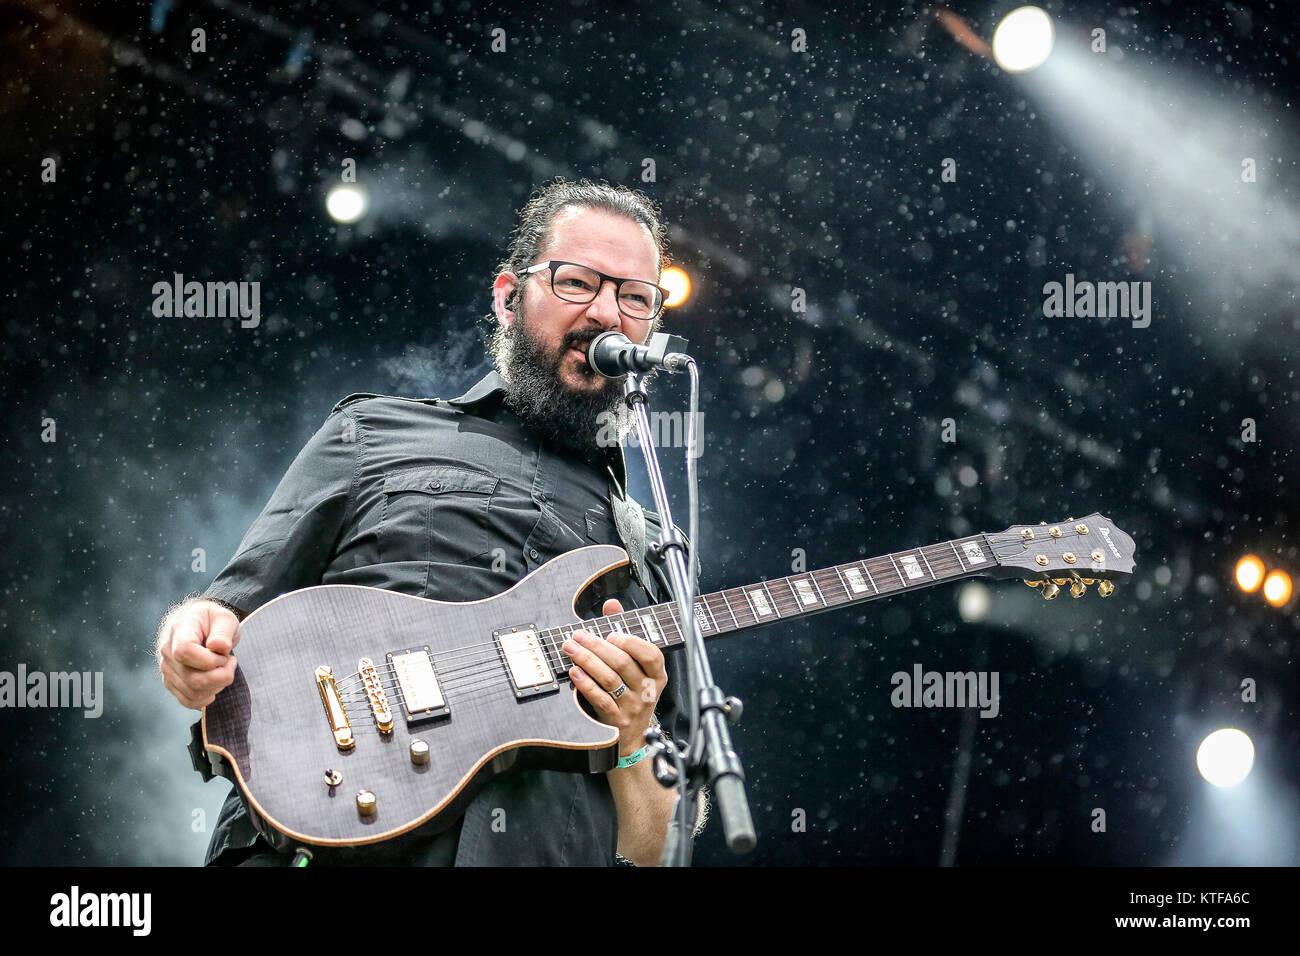 The Norwegian multi-instrumentalist, composer and songwriter Vegard Sverre Tveitan is better known by his moniker Ihsahn and here performs a live concert at the Norwegian music festival Tons of Rock 2015. Norway, 18/06 2015. Stock Photo